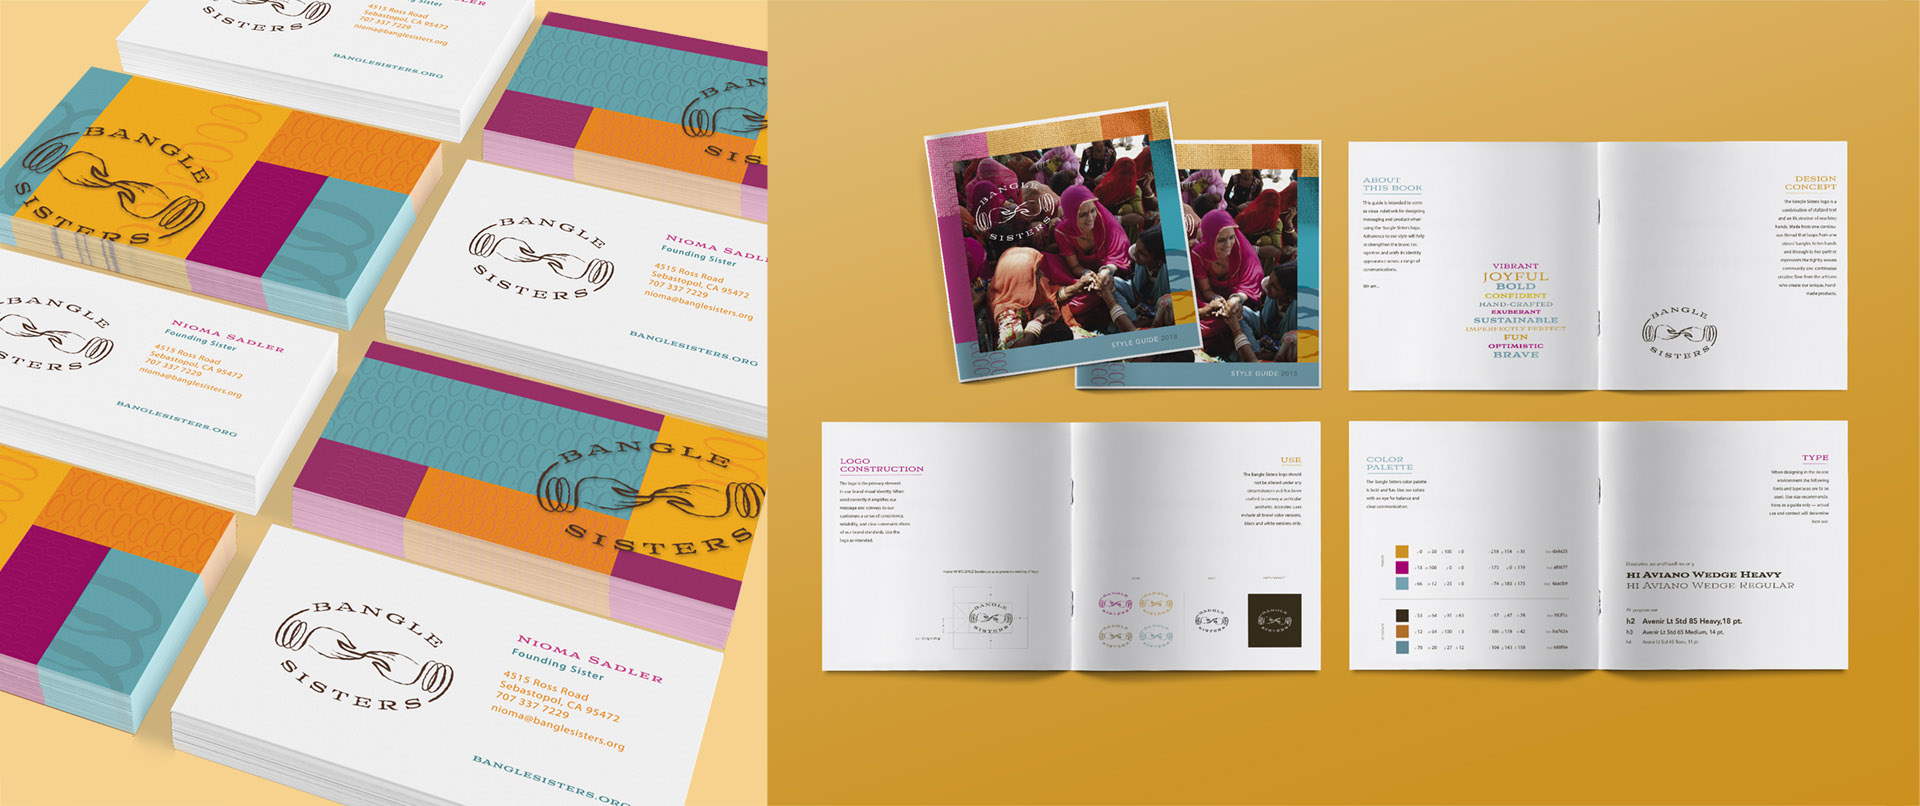 image of Bangle Sisters logo and brand guidelines